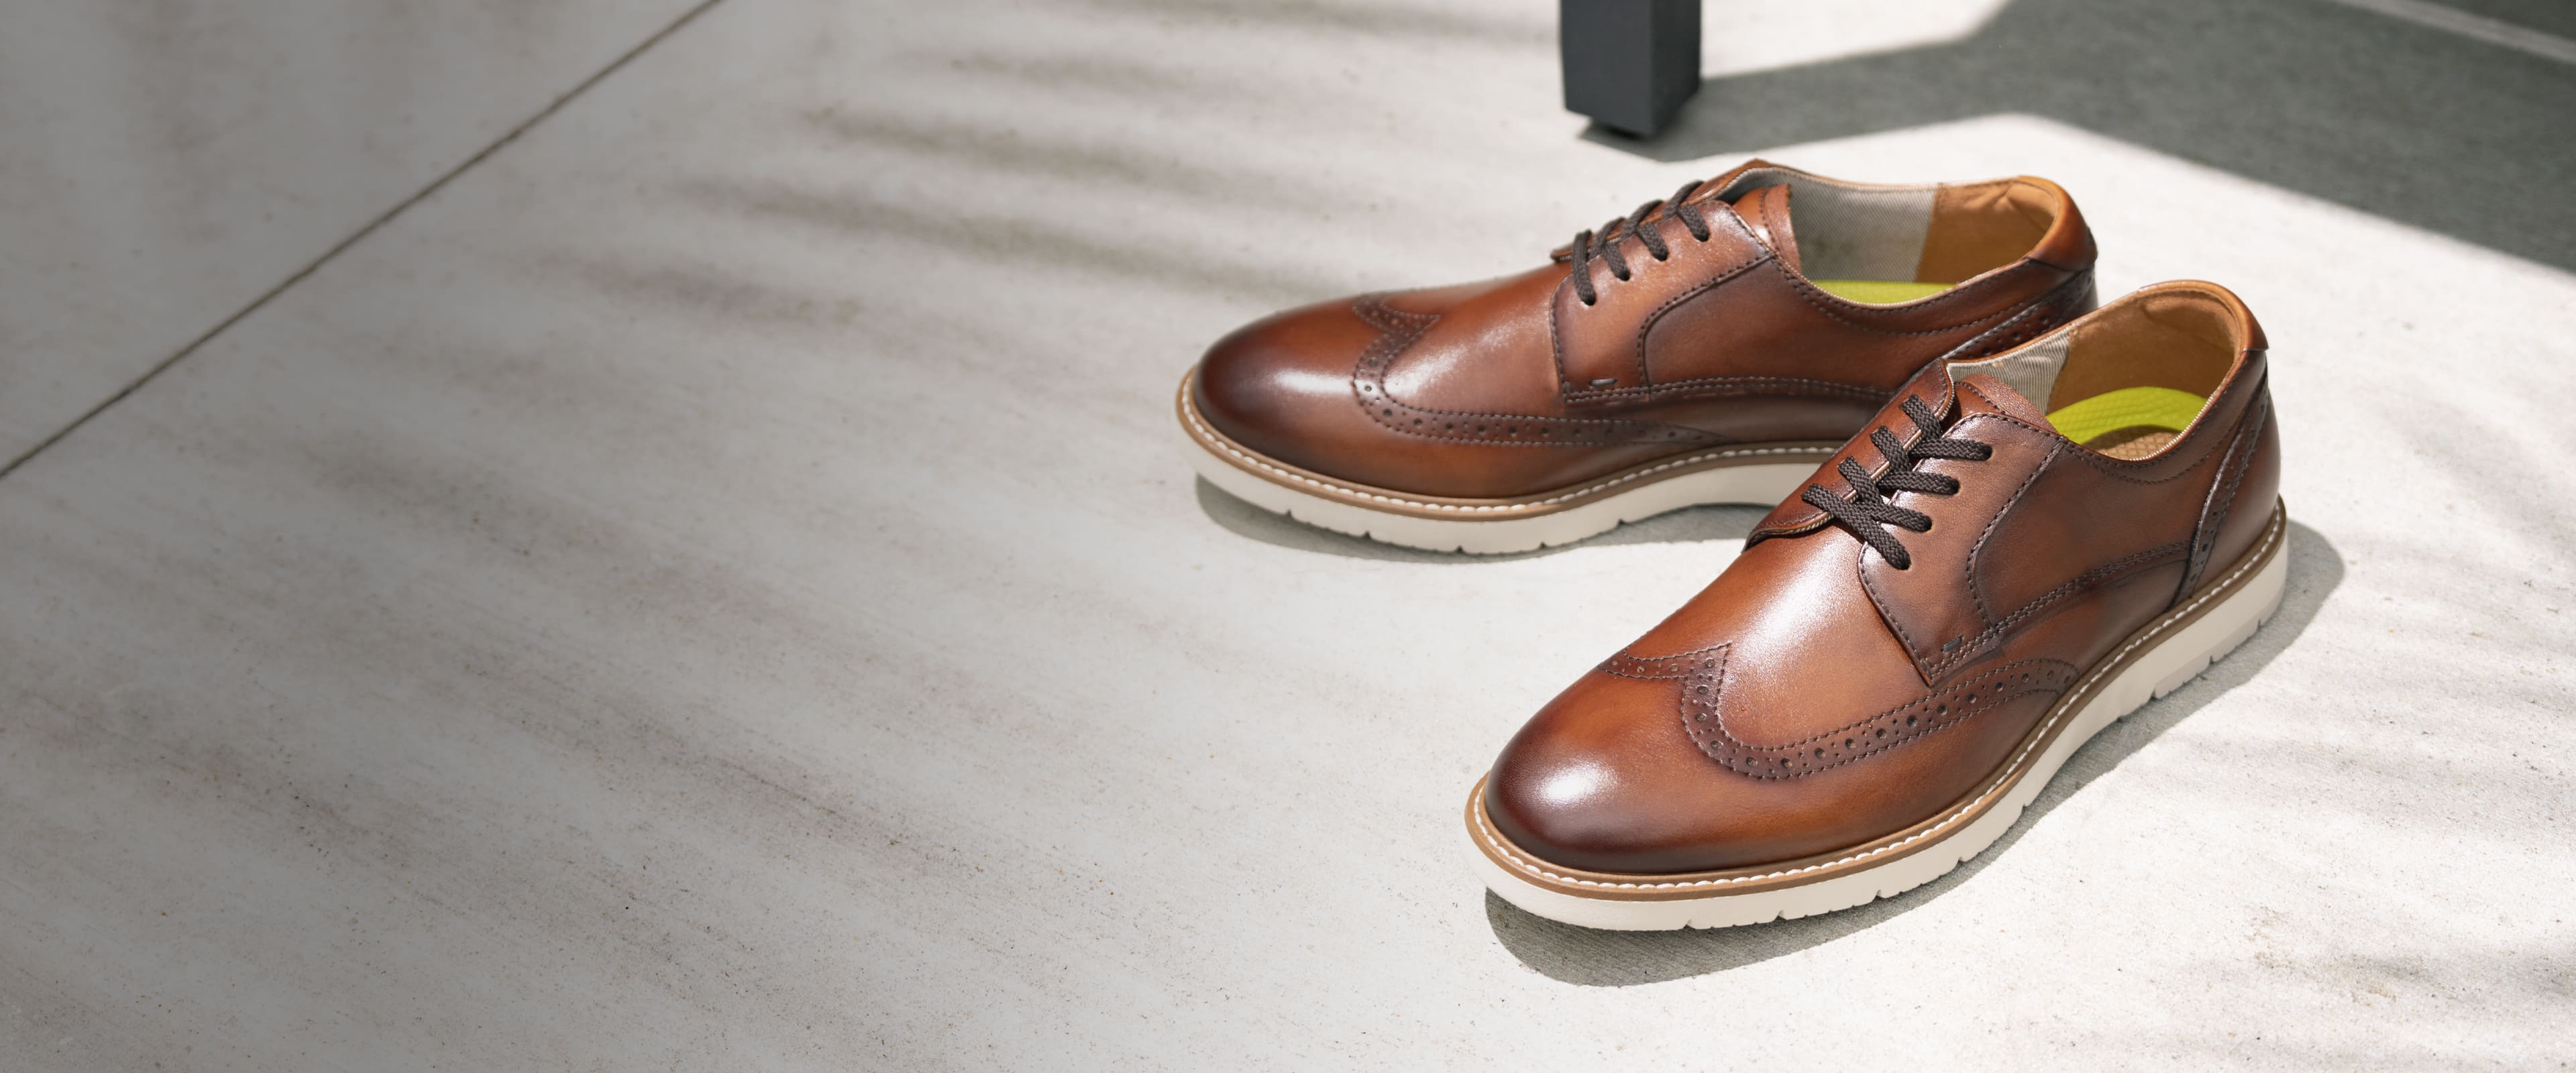 Click to shop Florsheim new arrivals. Image features the Vibe wingtip in cognac.